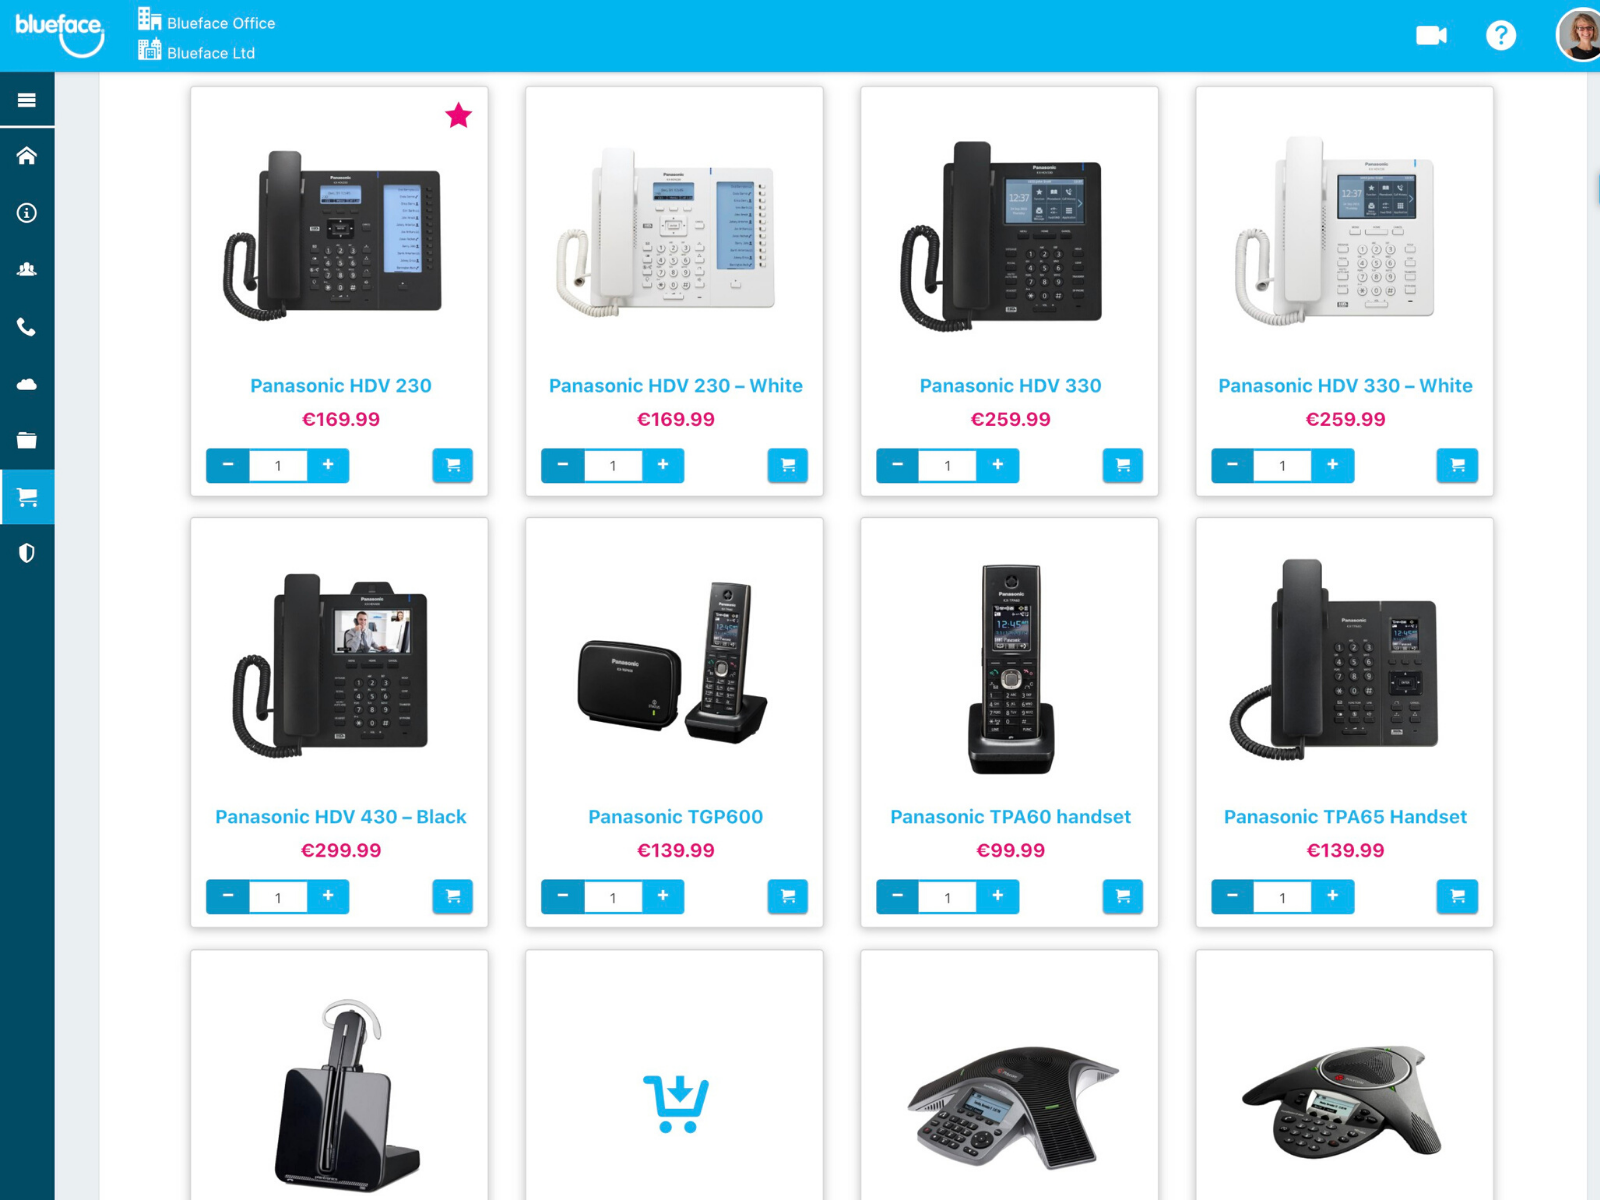 Blueface Store Overview